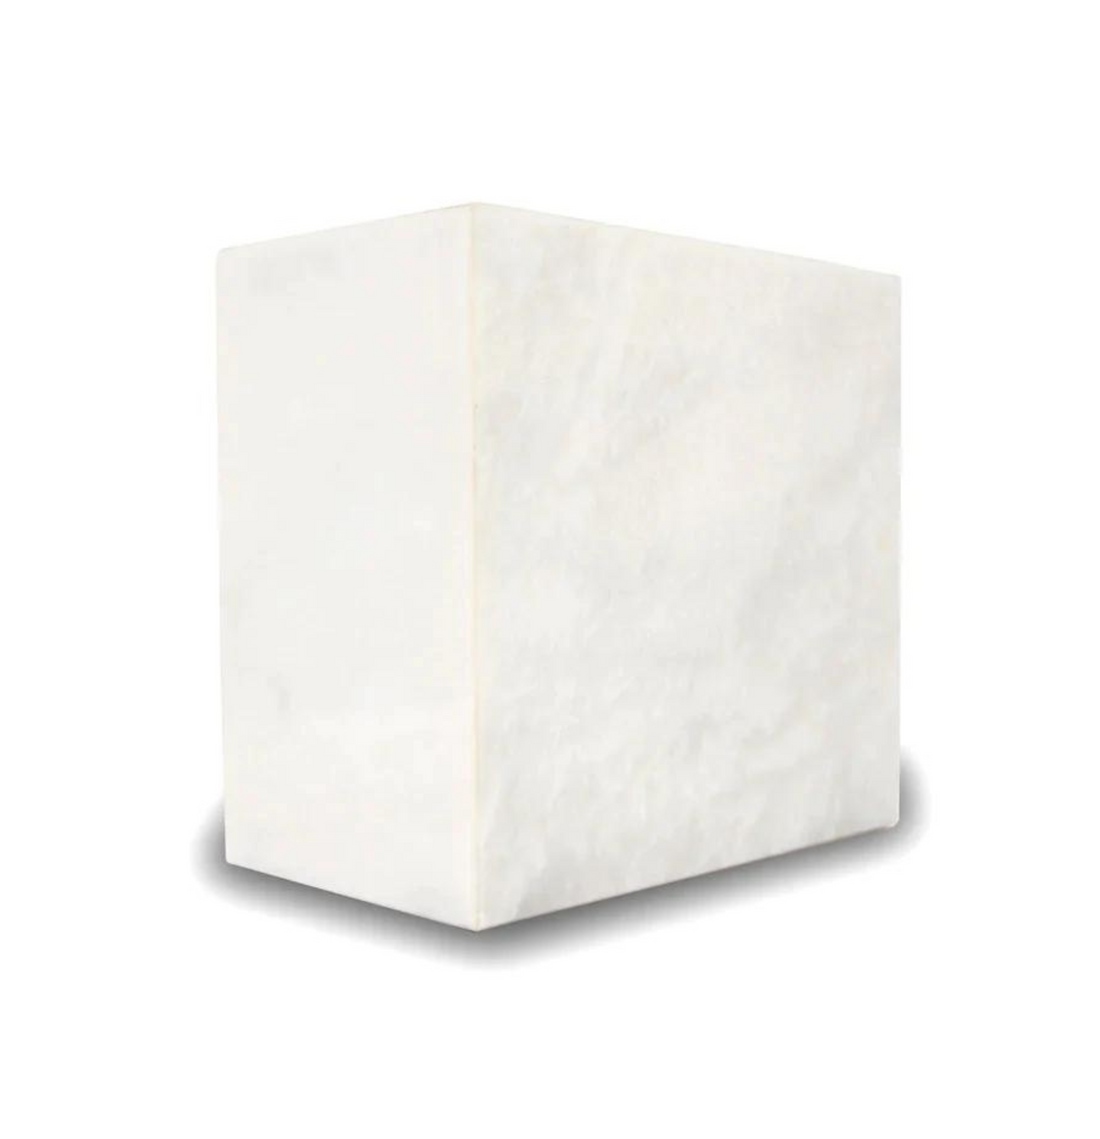 The Centre Urn in White Marble